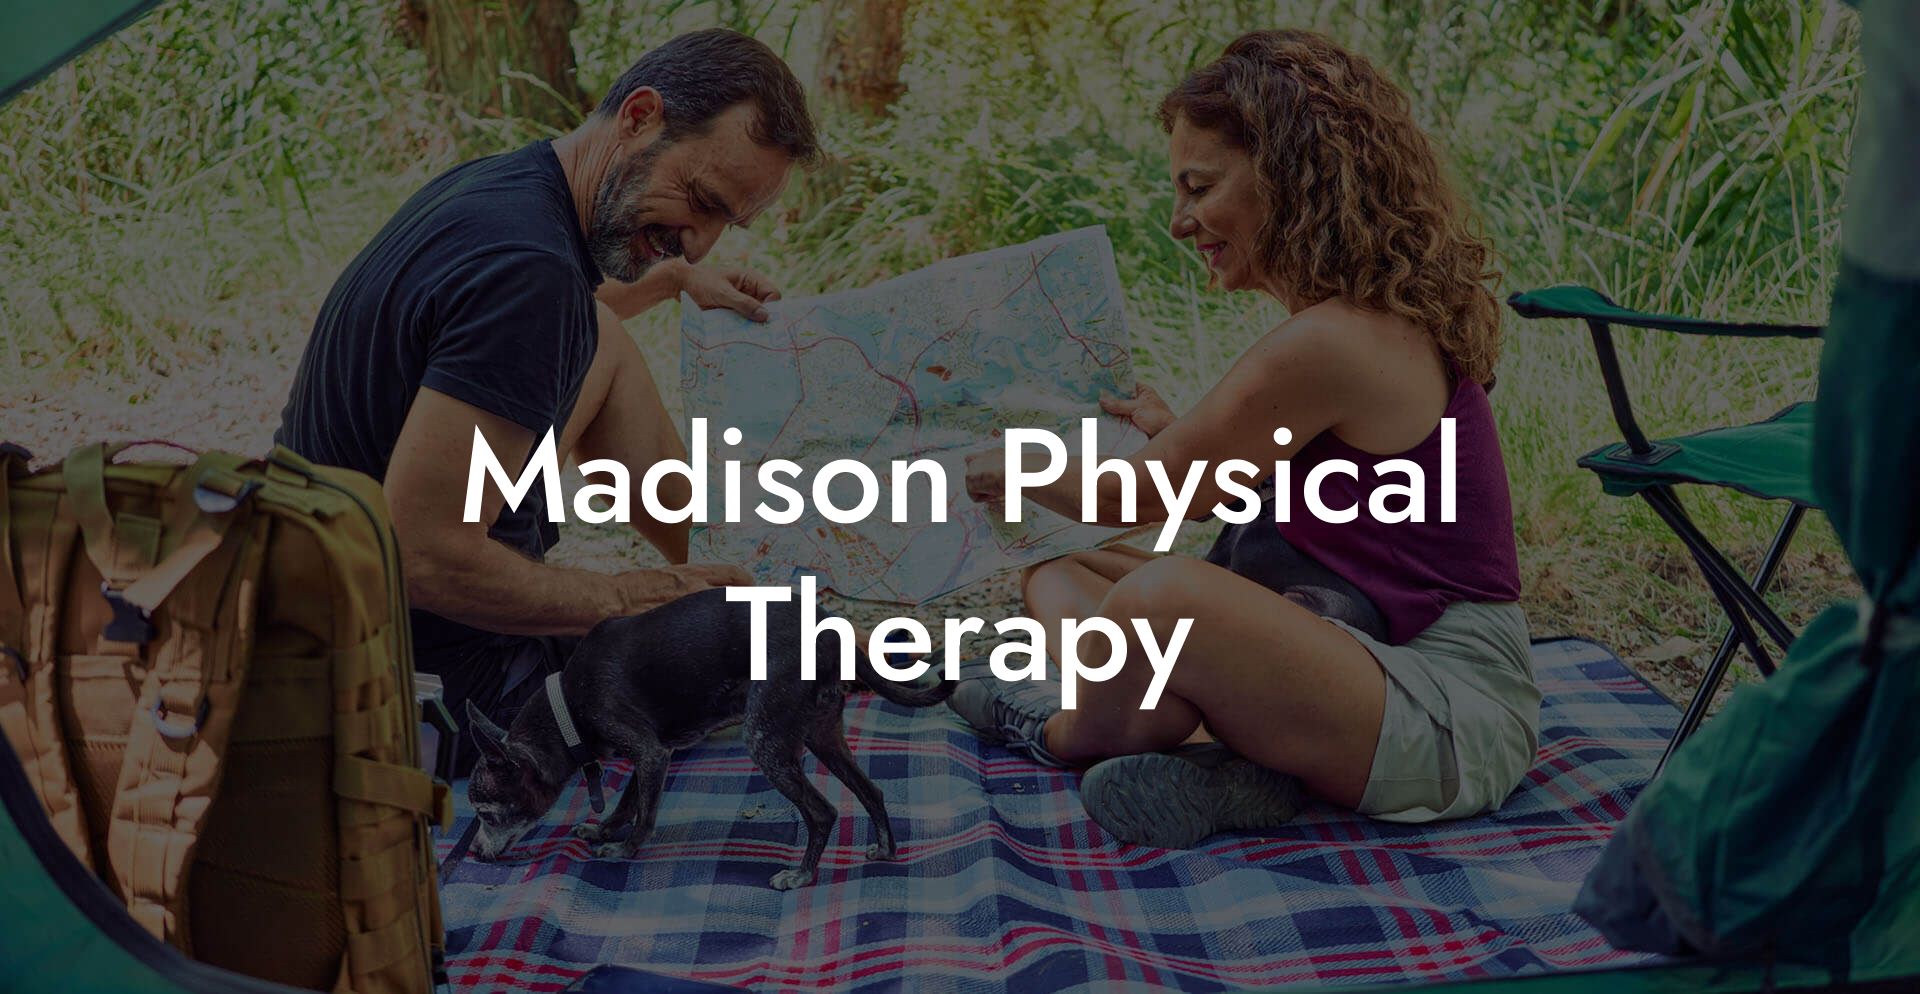 Madison Physical Therapy